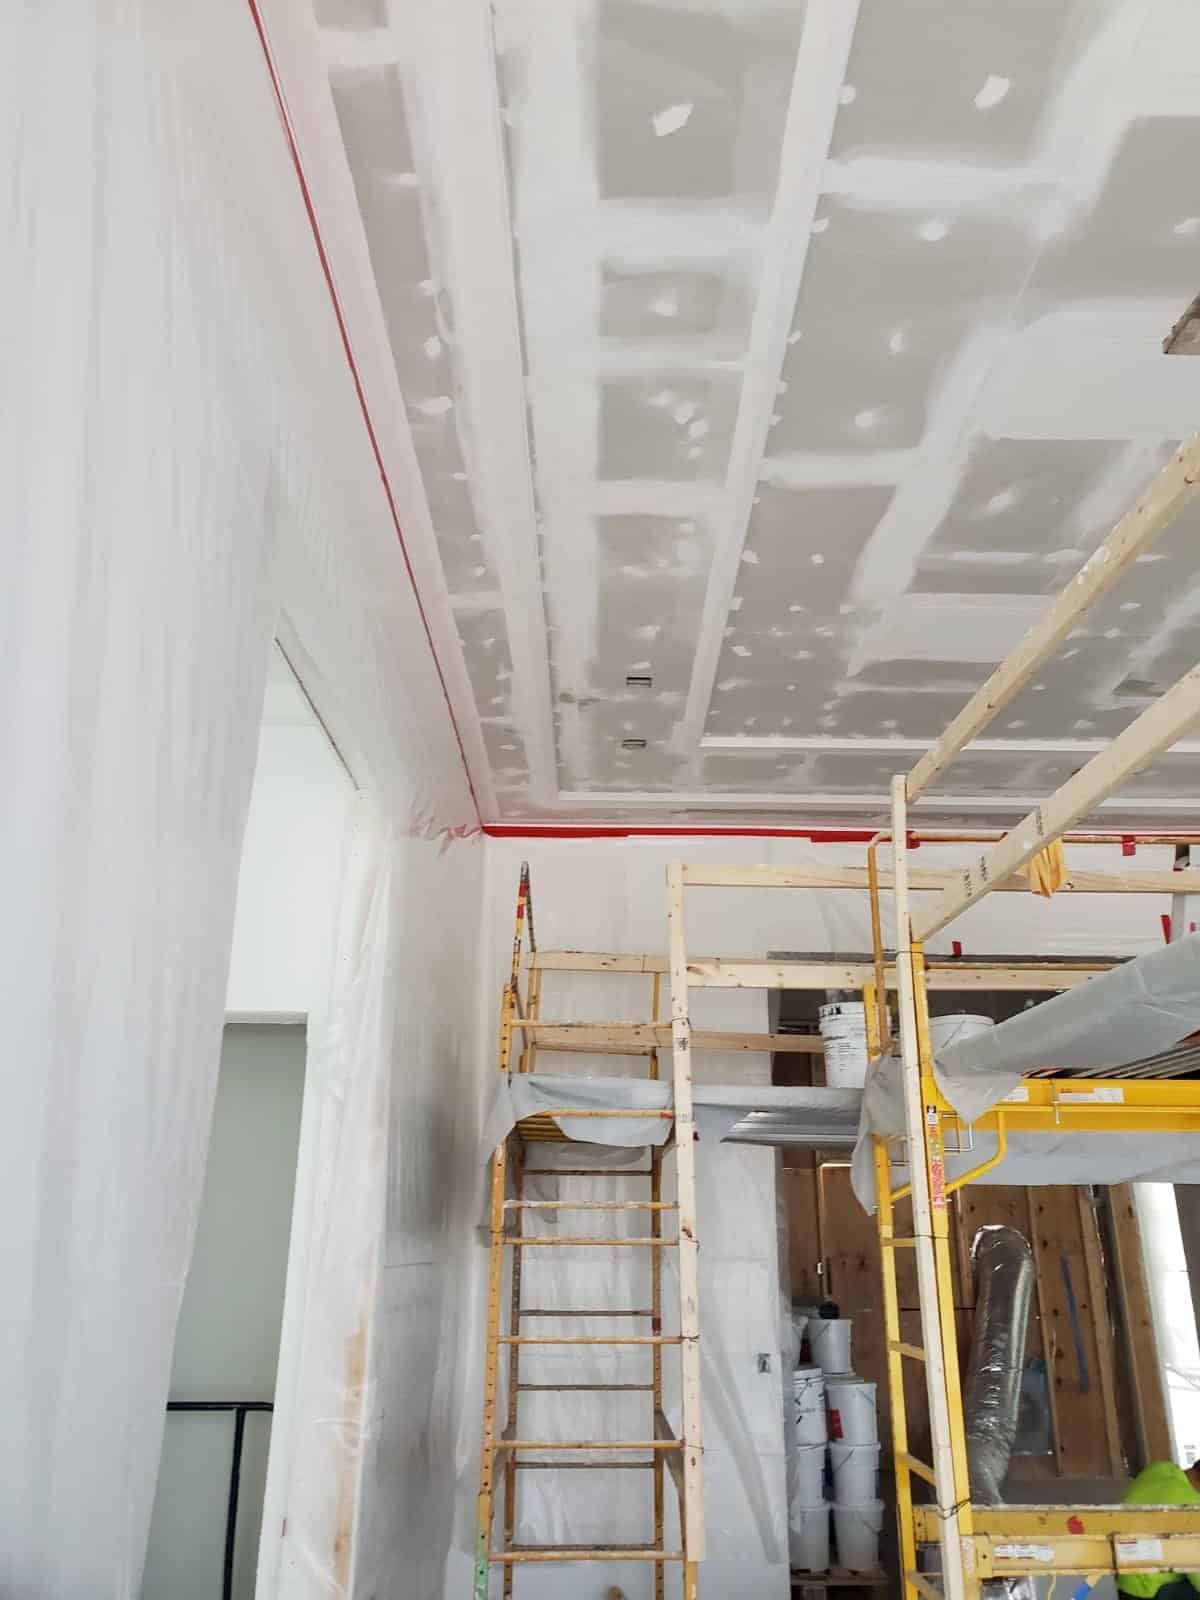 Bradleigh Applications Inc Acoustical Plaster using StarSilent at Lost Tree Village Private Residence